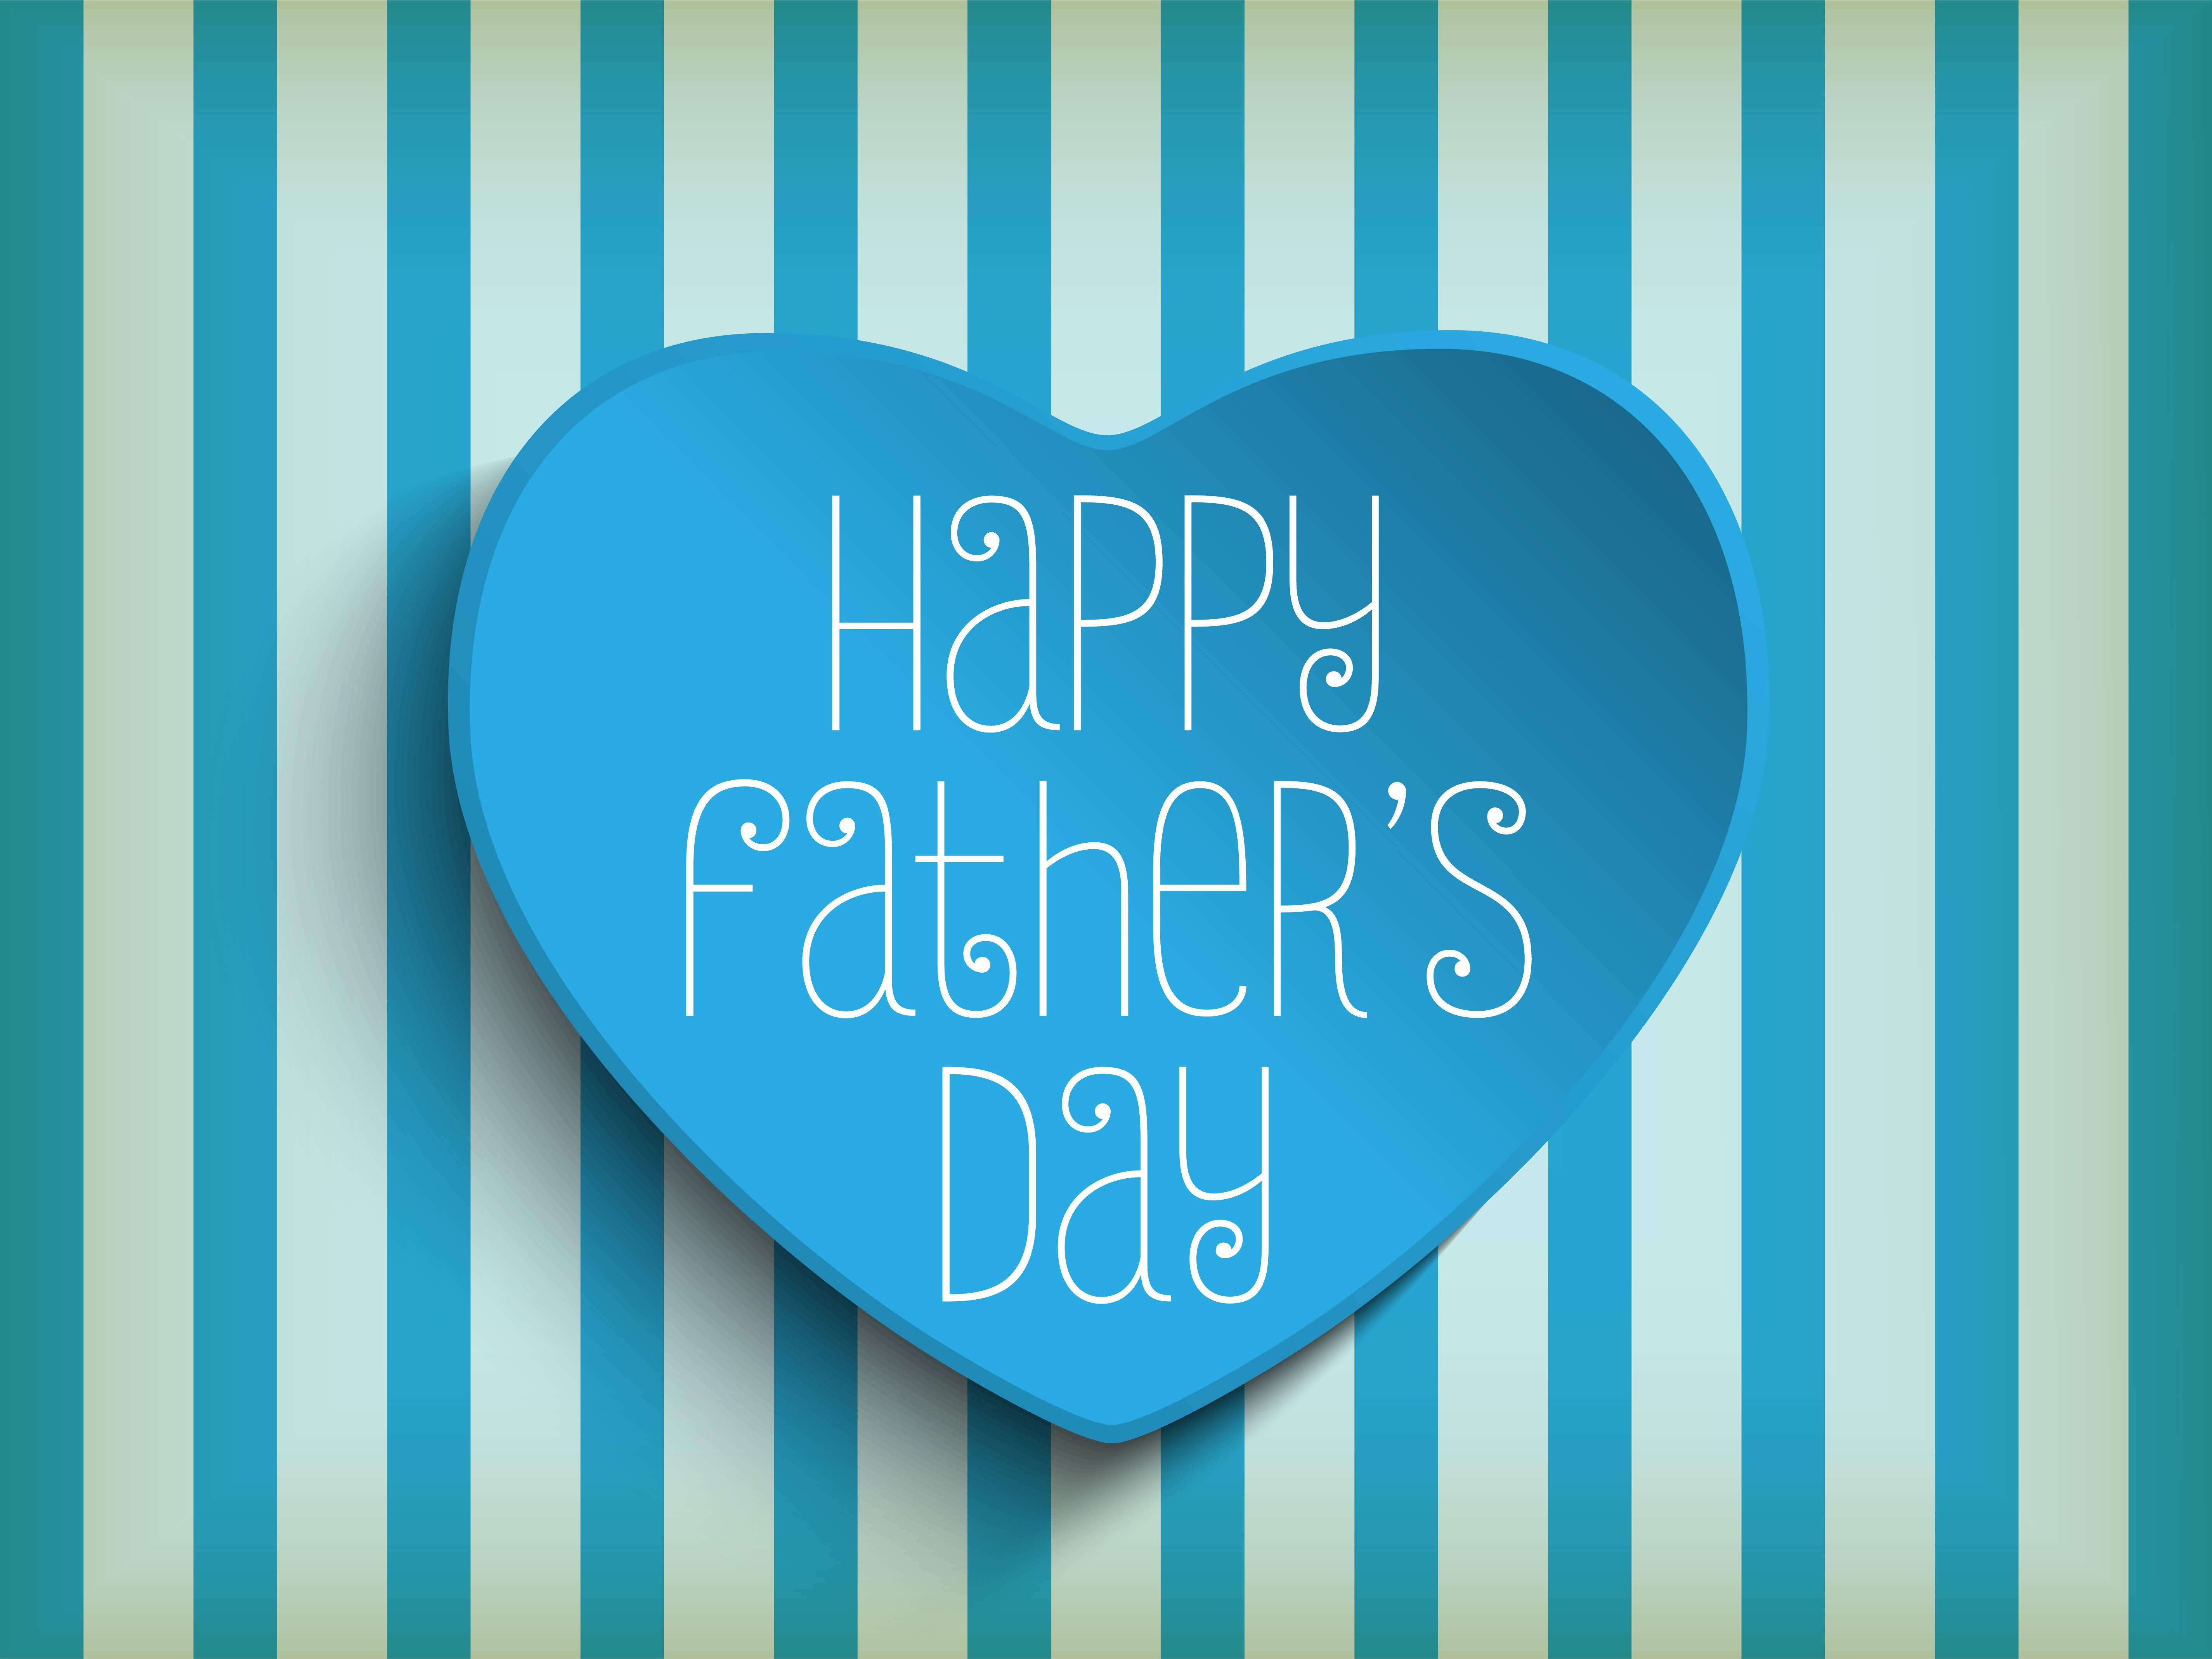 Happy Fathers Day Image: Fathers Day 2019 Pictures Photos Wallpapers